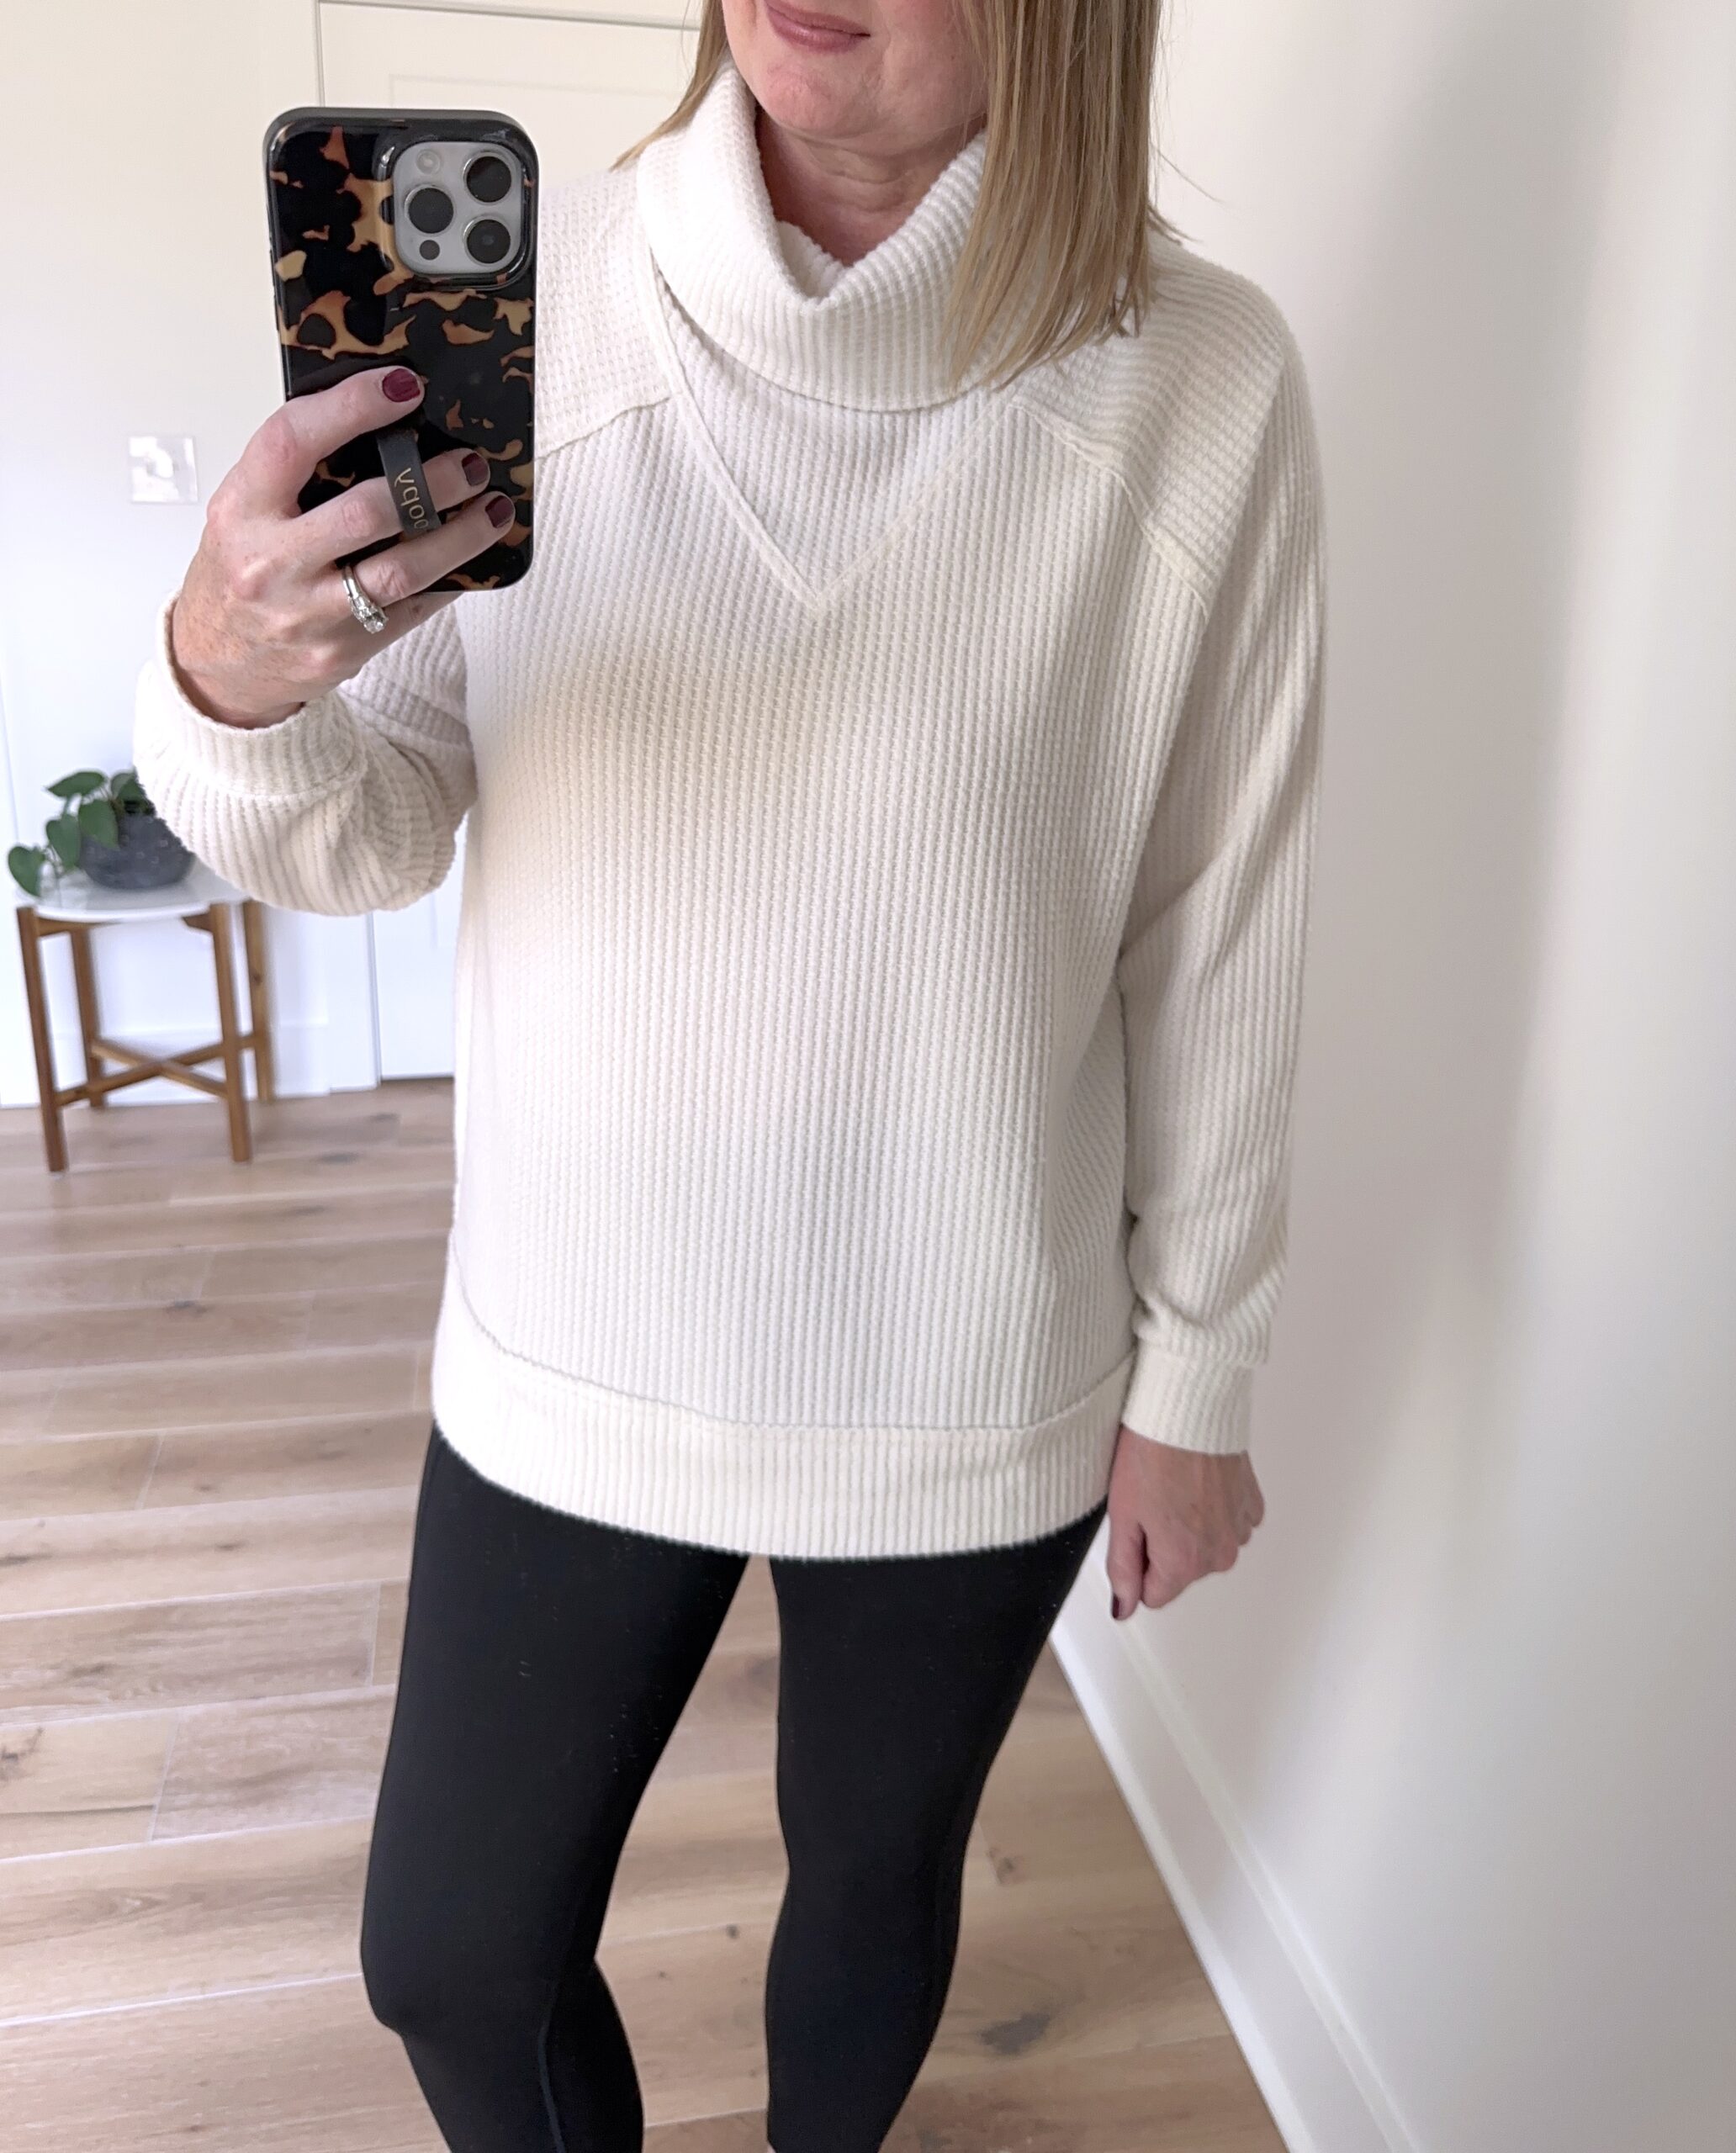 Our Editor Tried On 9 Pieces From Mango—Here's Her Review